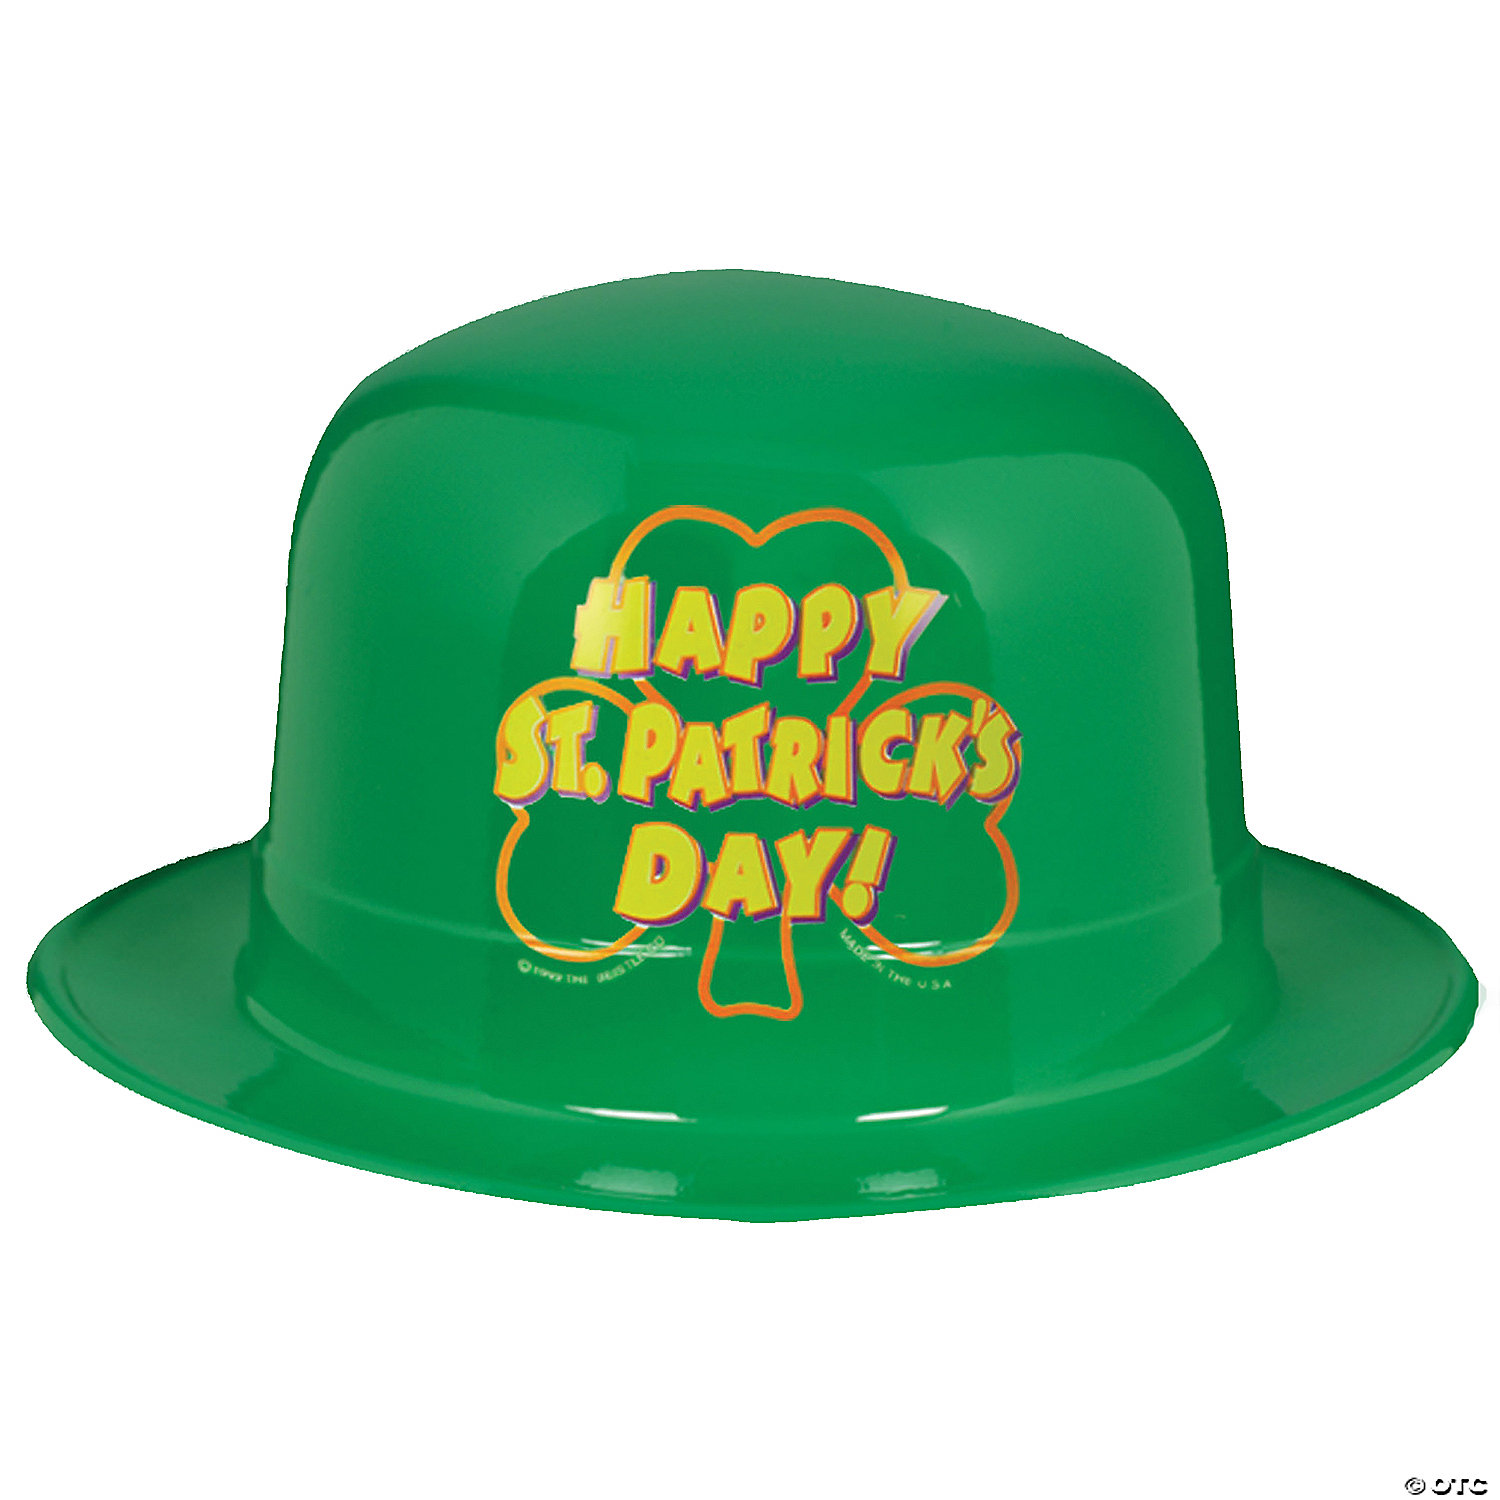 ST. PATRICK'S DAY HAT- 5 PACK - ST. PATRICK'S DAY